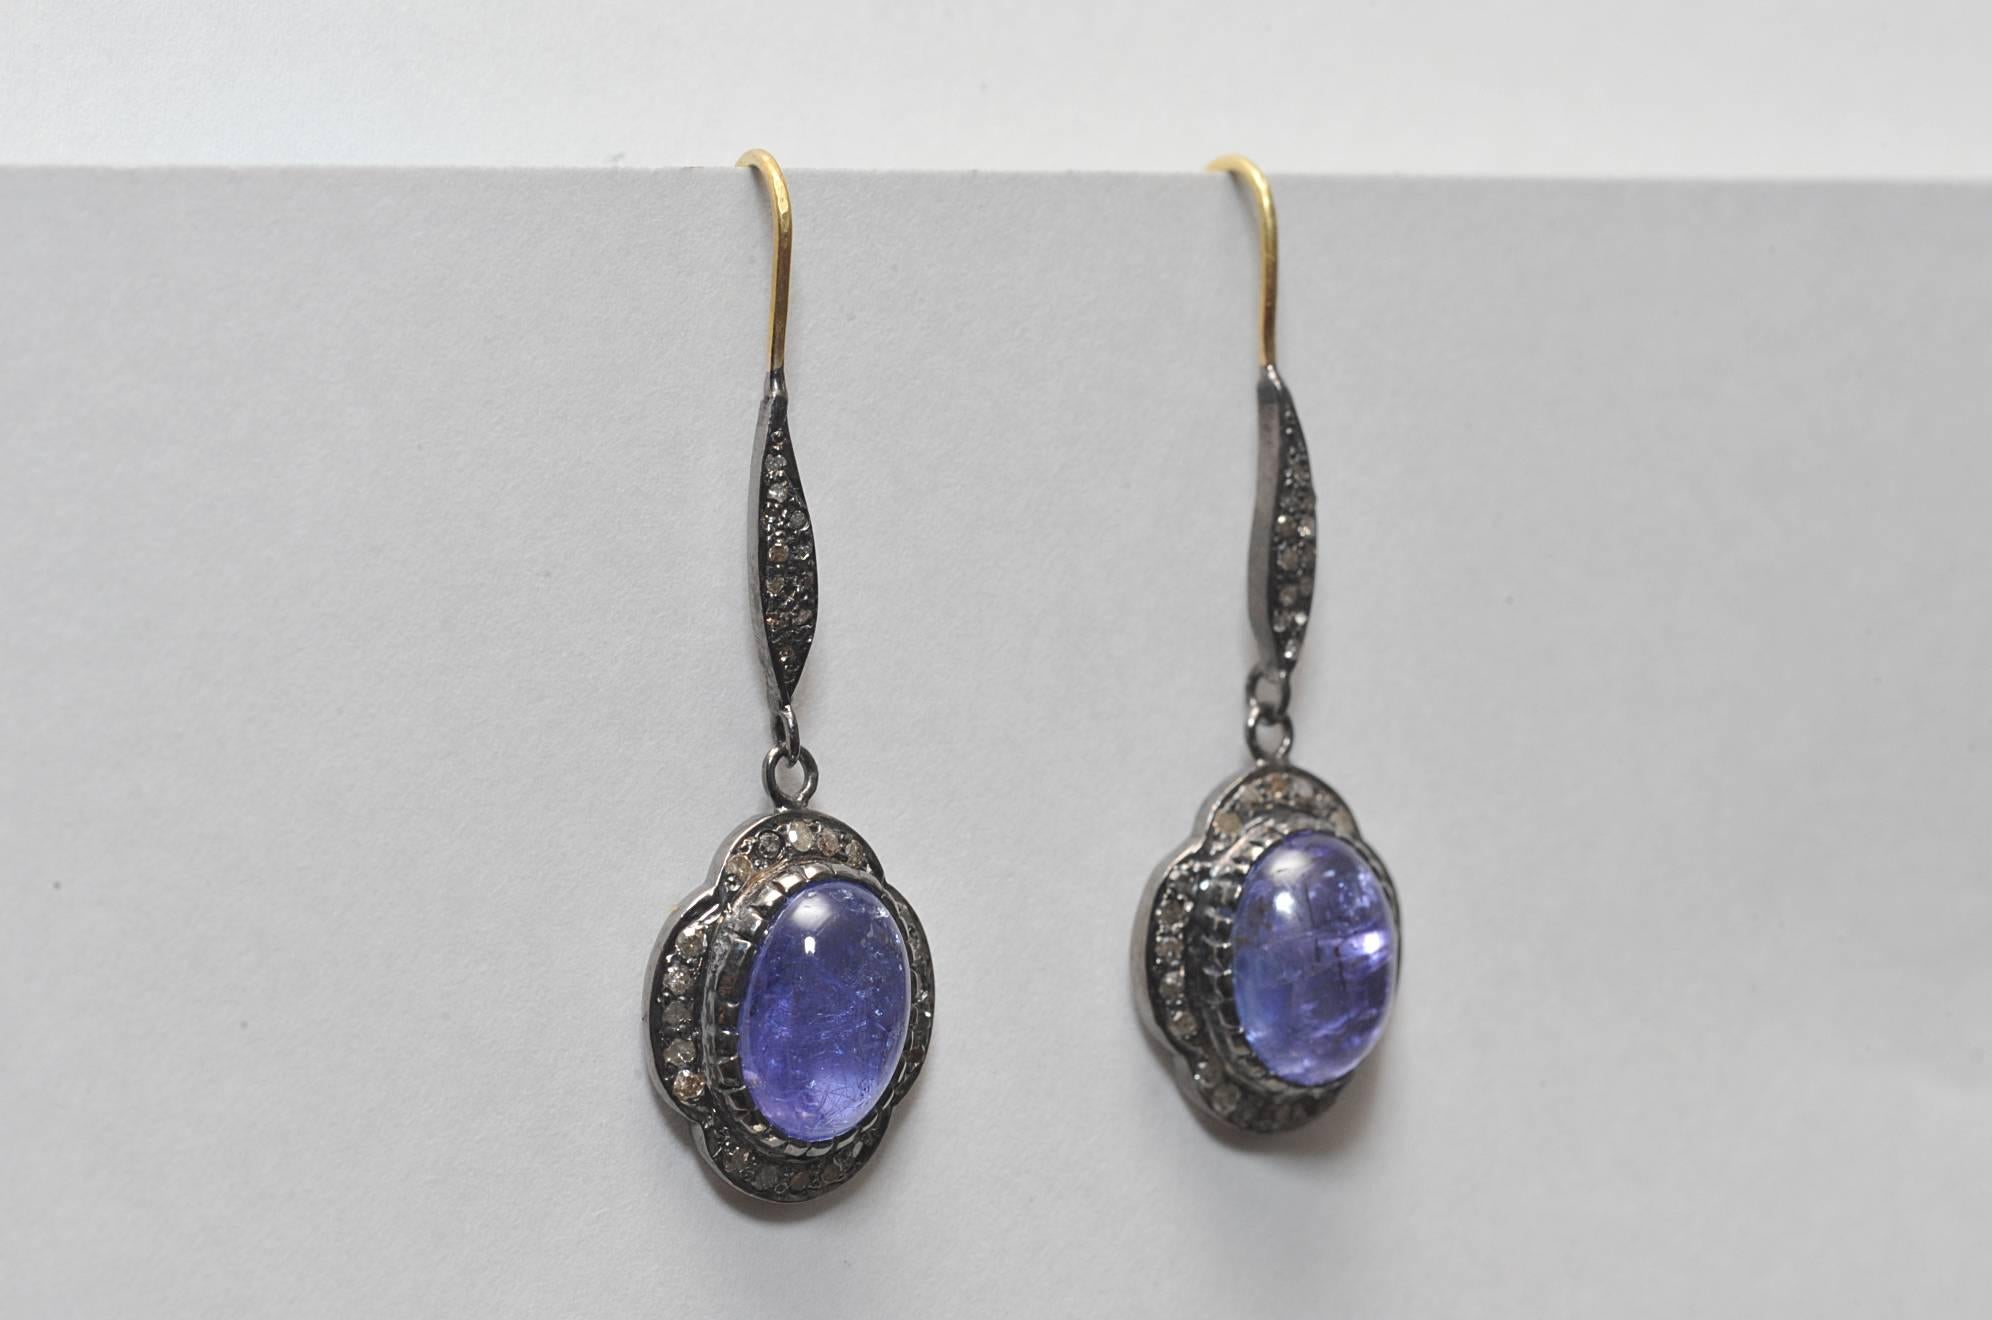 Pair of cabochon tanzanite earrings bordered with pave`-set diamonds set in oxidized sterling with 18K gold French wire.  Tanzanite is 8.9 carats and diamonds are .48 carats.  